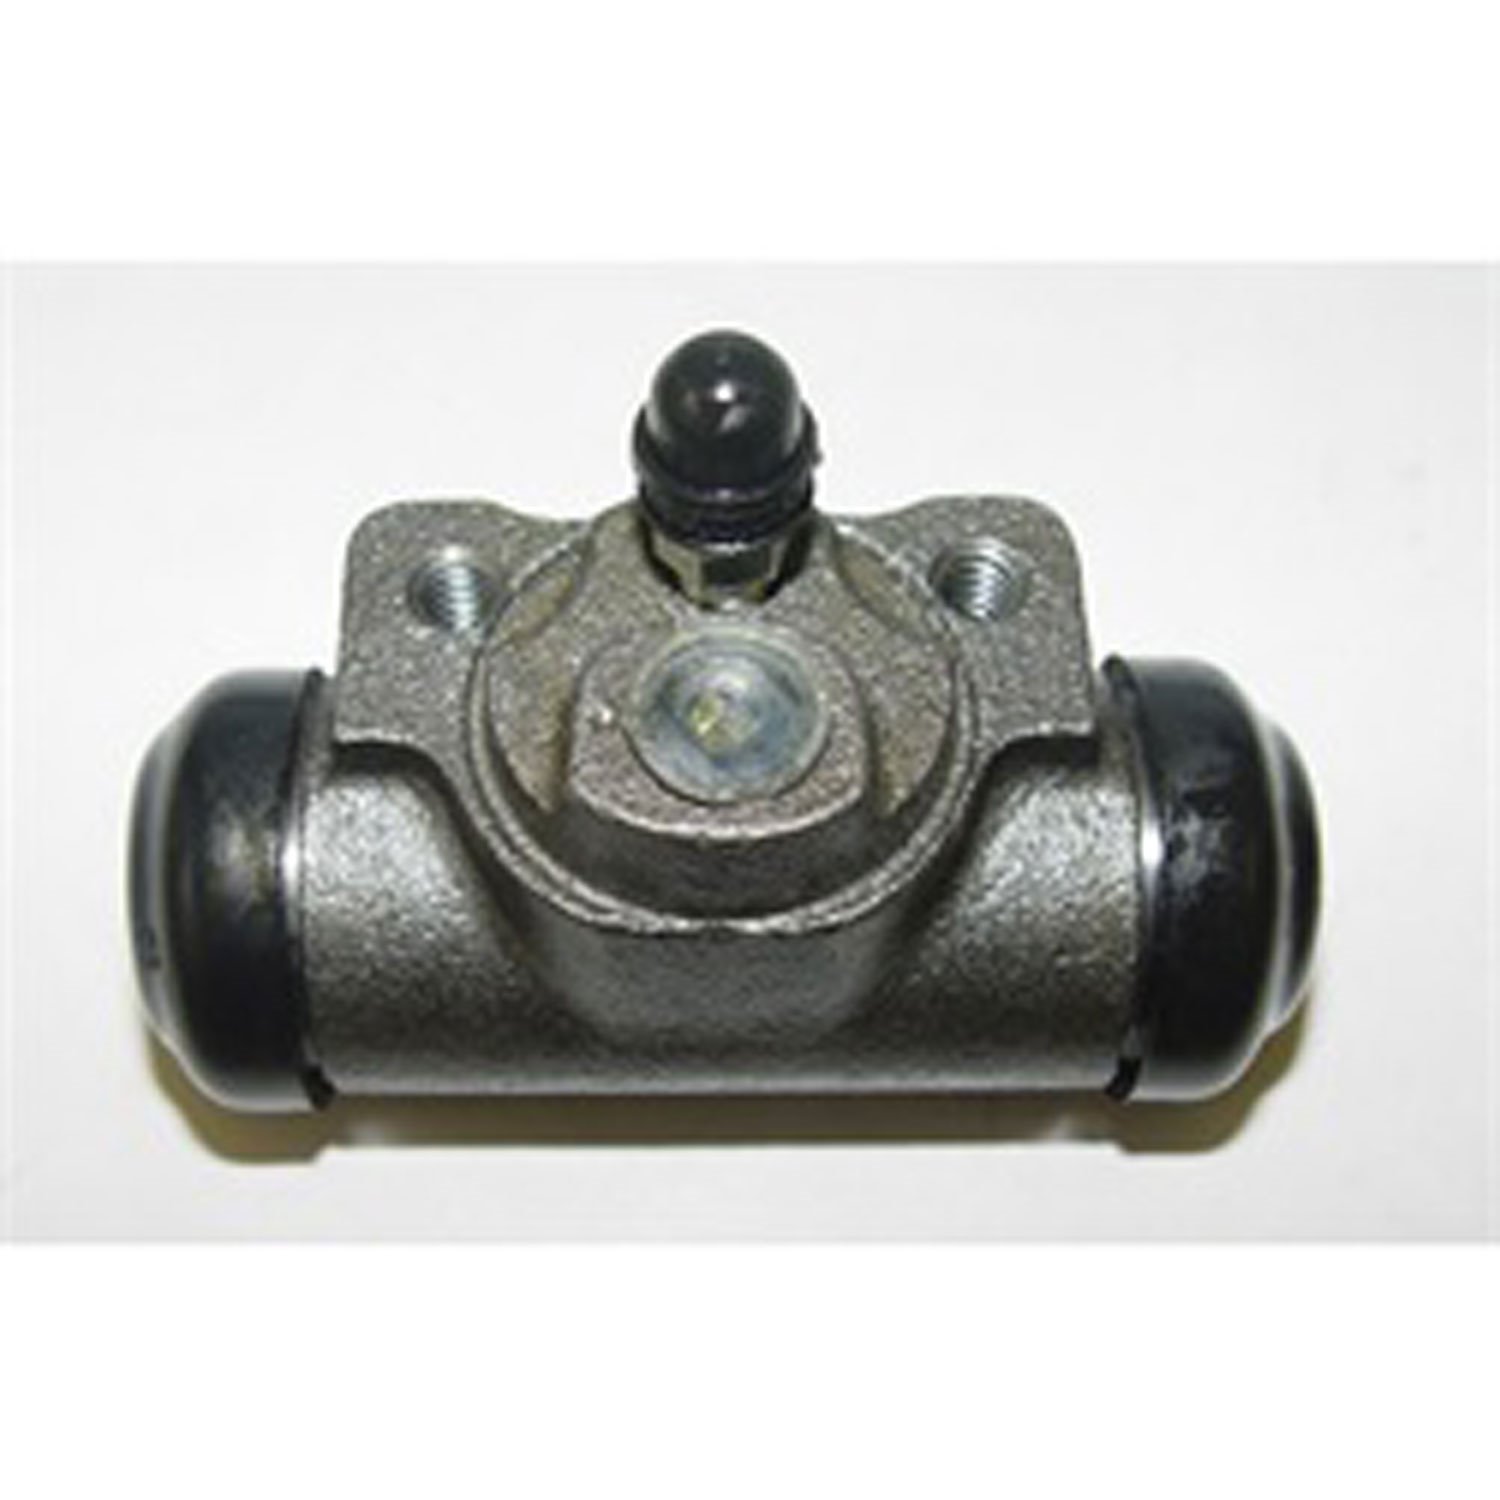 This rear wheel cylinder from Omix-ADA fits 90-95 Jeep Wrangler YJ and 97-00 Jeep Wrangler TJ . Fits left or right side.